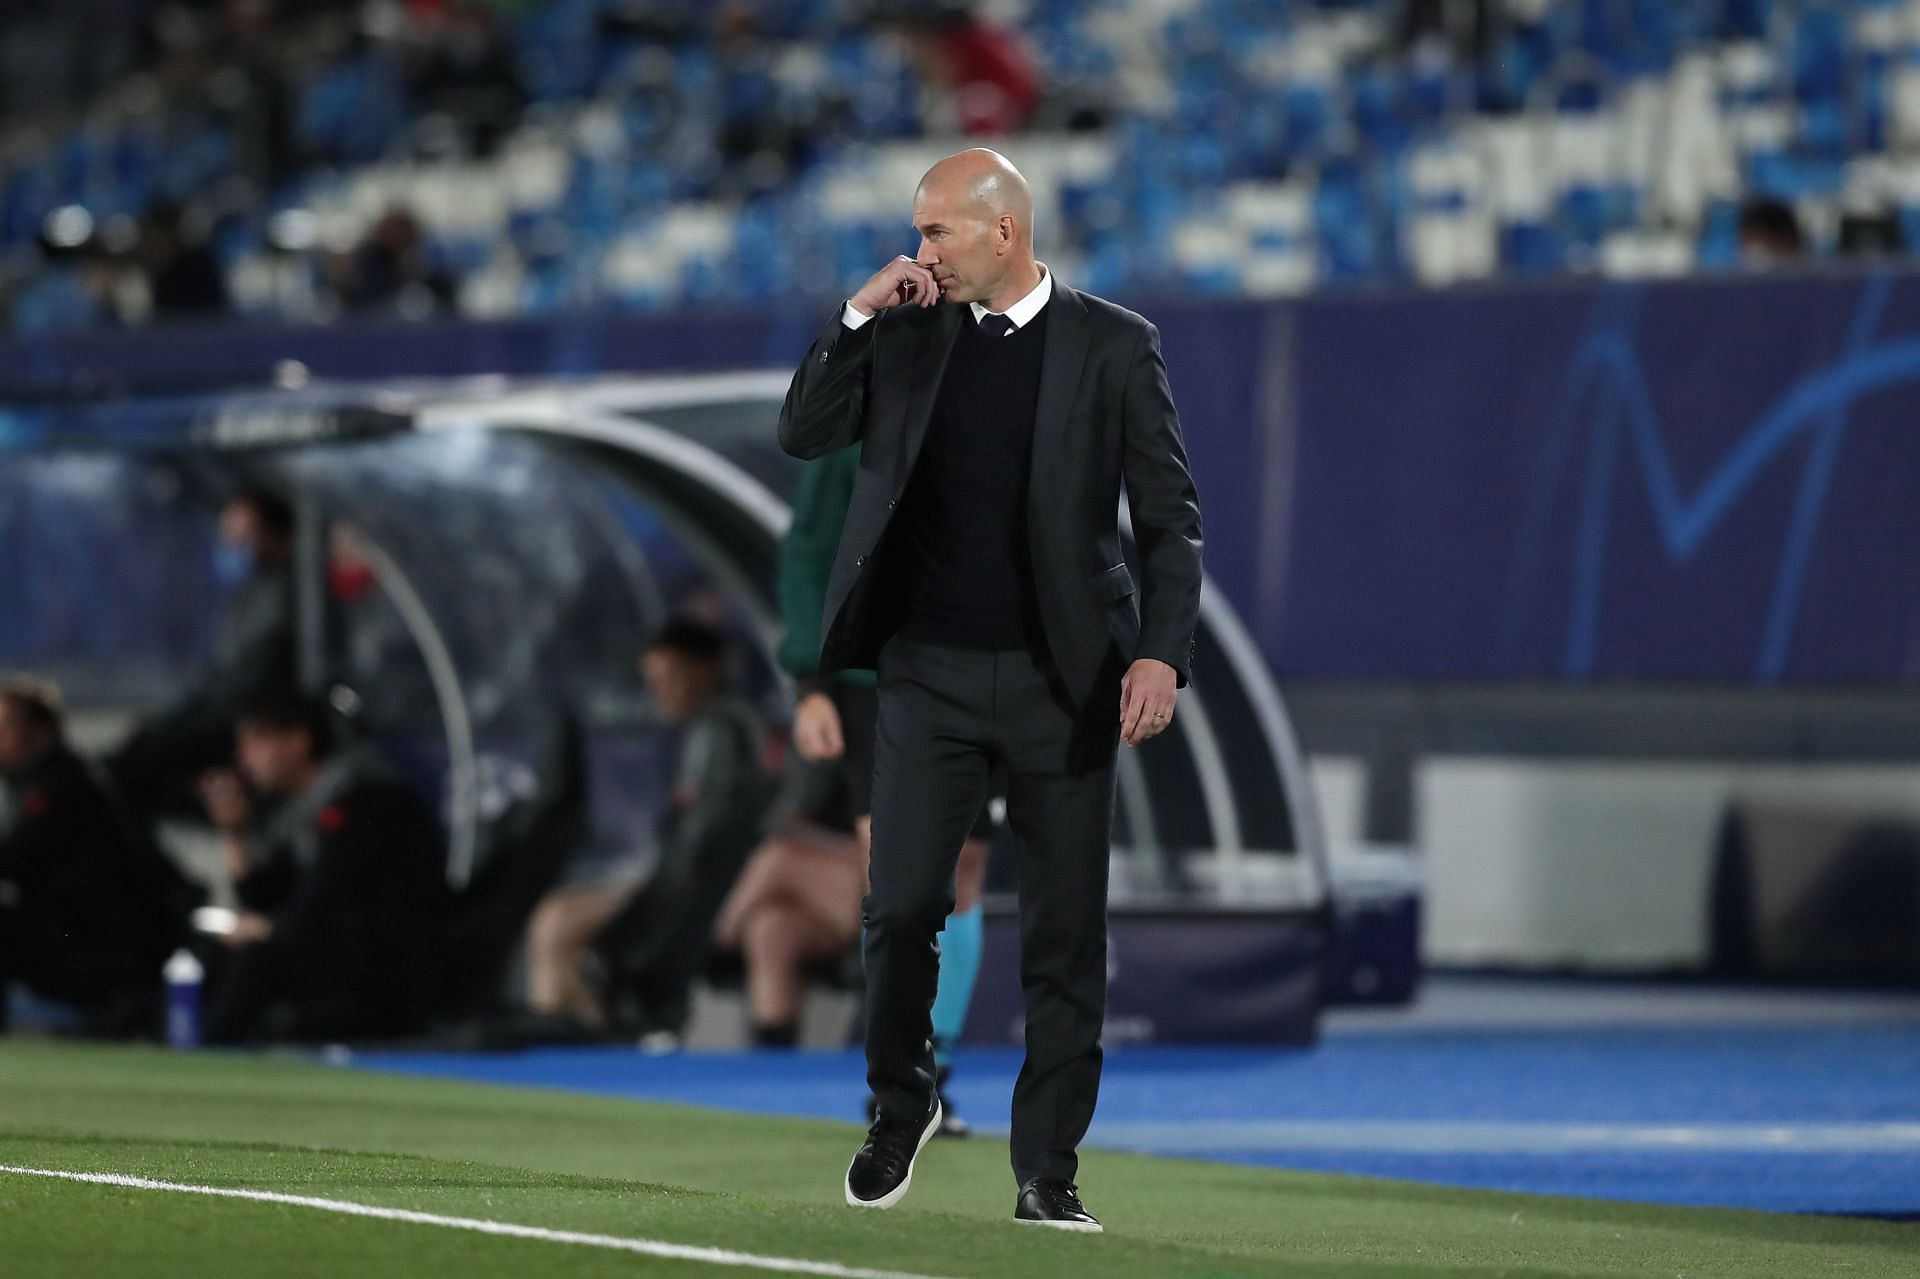 The Parisians are ready to present Zinedine Zidane a lucrative offer to take charge at the club.